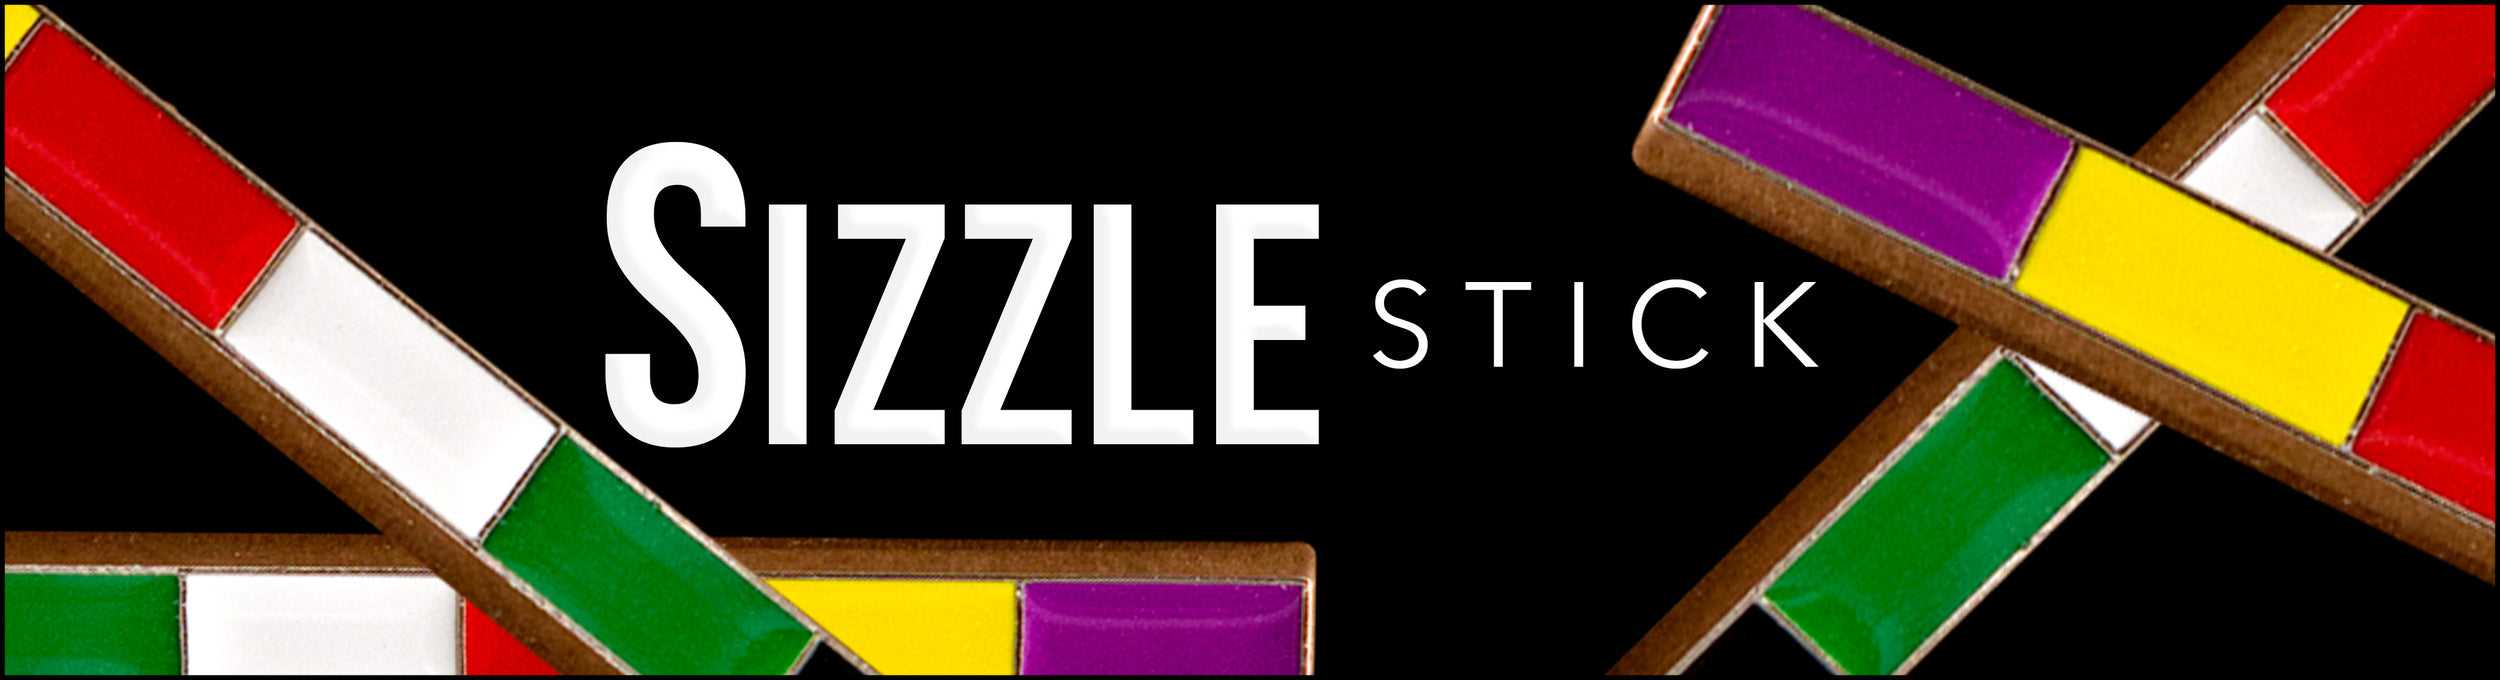 The Sizzle Stick - Limited Edition Two Piece Set